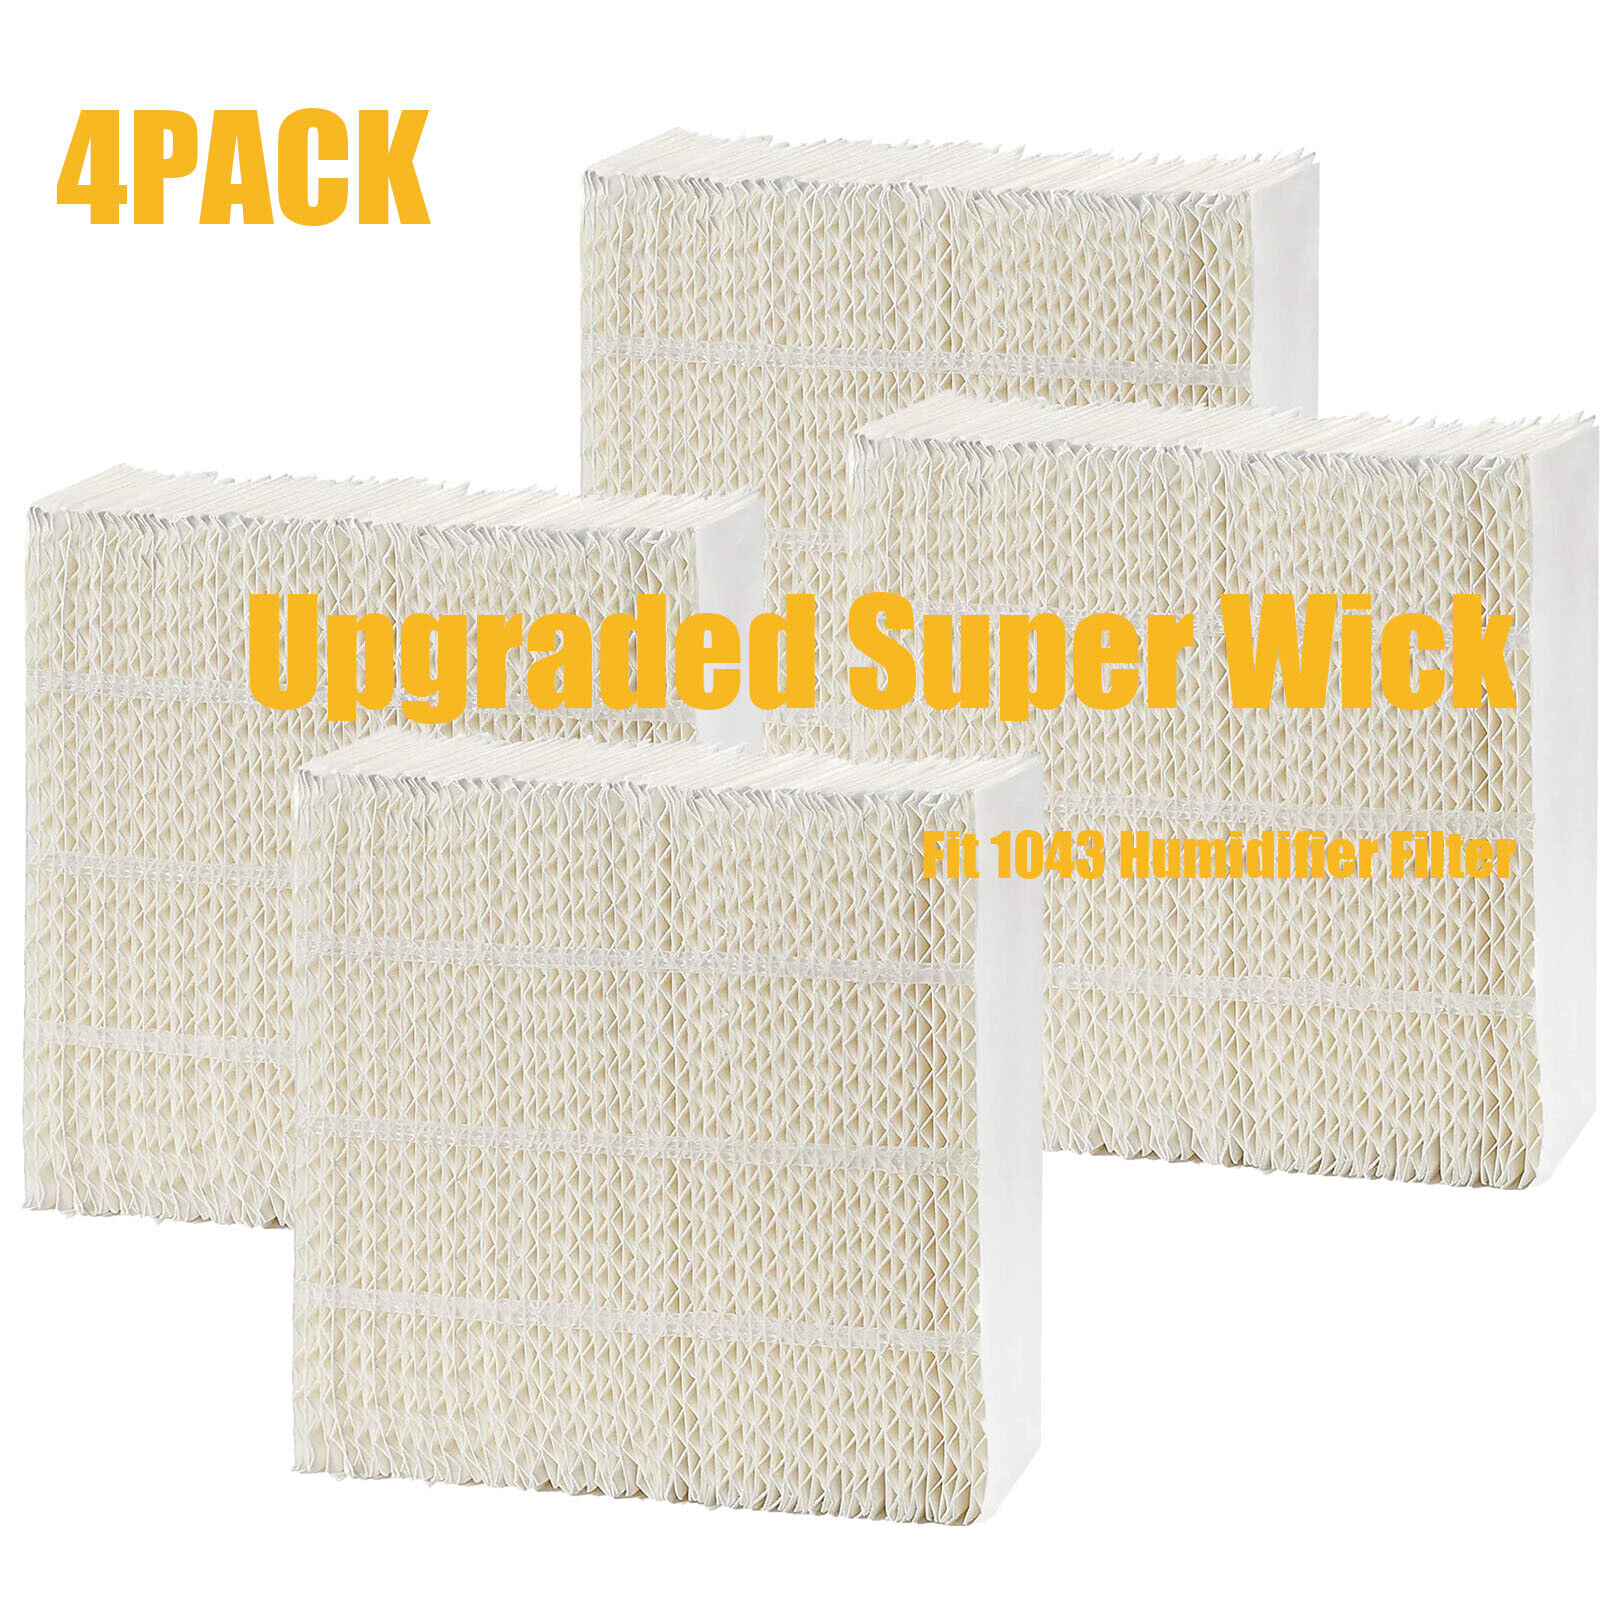 1043 Humidifier Filter Replacement (Upgraded Super Wick) For Essick 4PACK